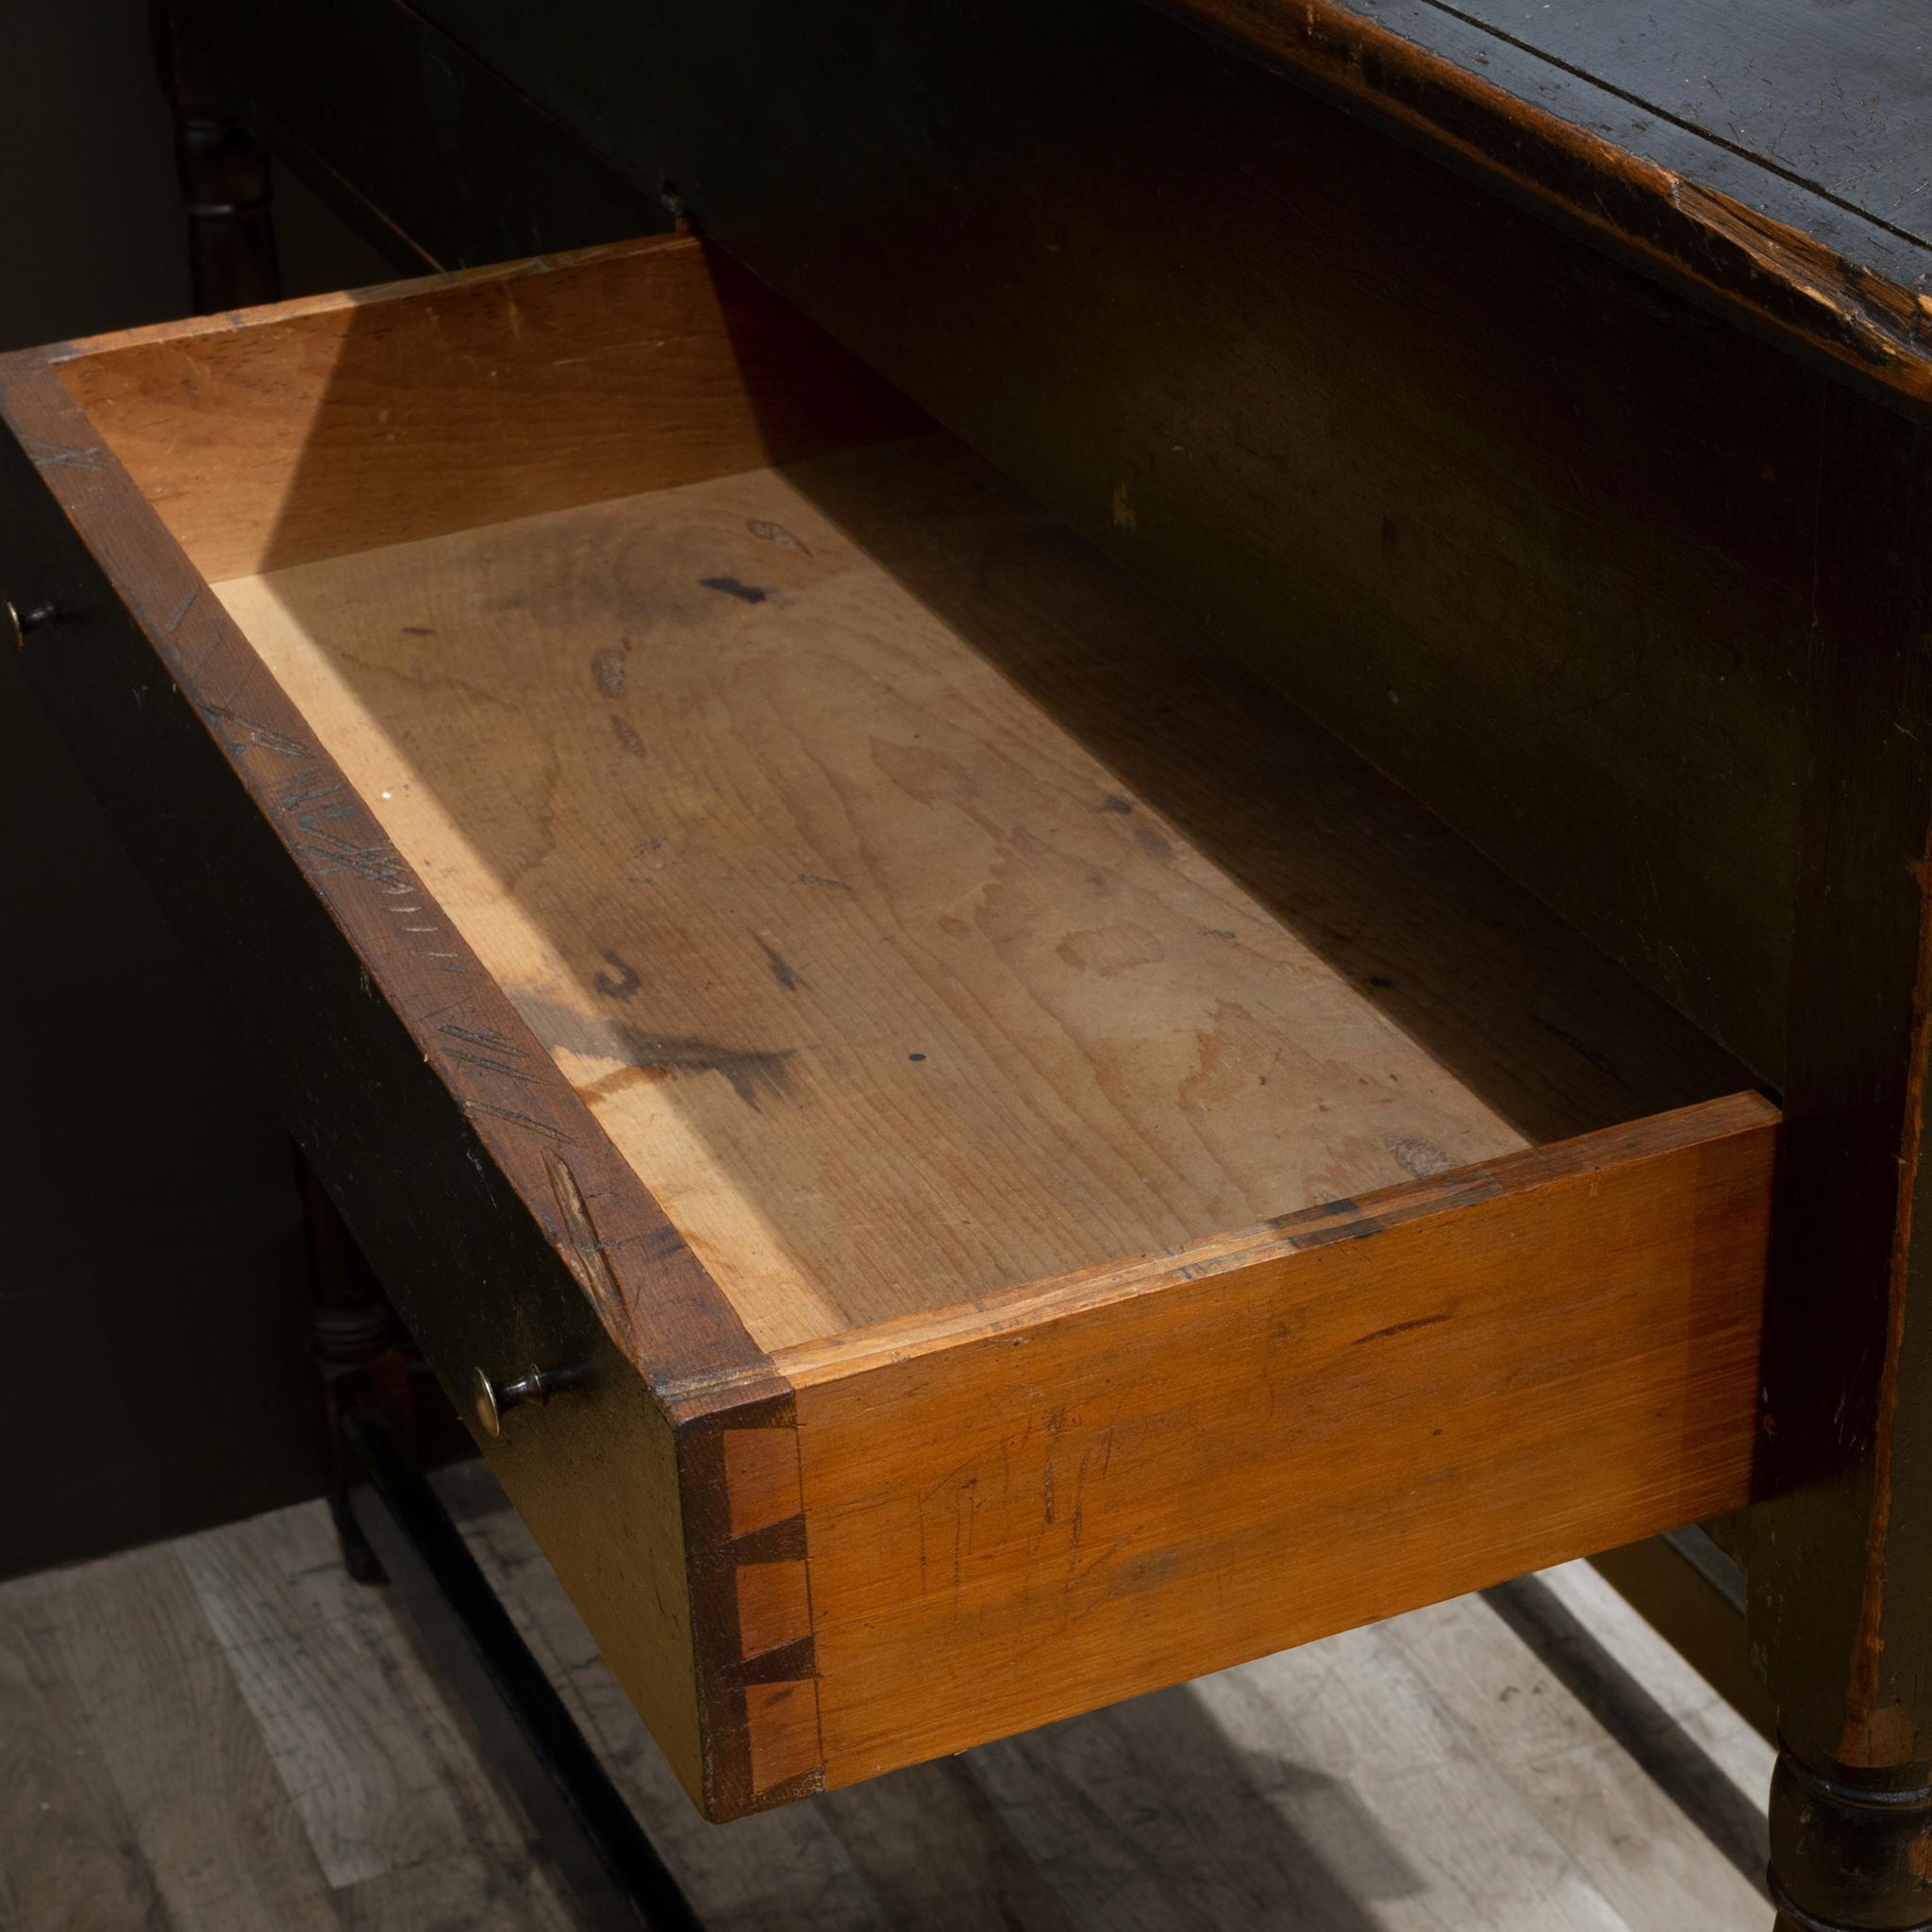 Pine Mid 19th C. Postmaster's Desk, c.1850-Contact us for more affordable shipping 